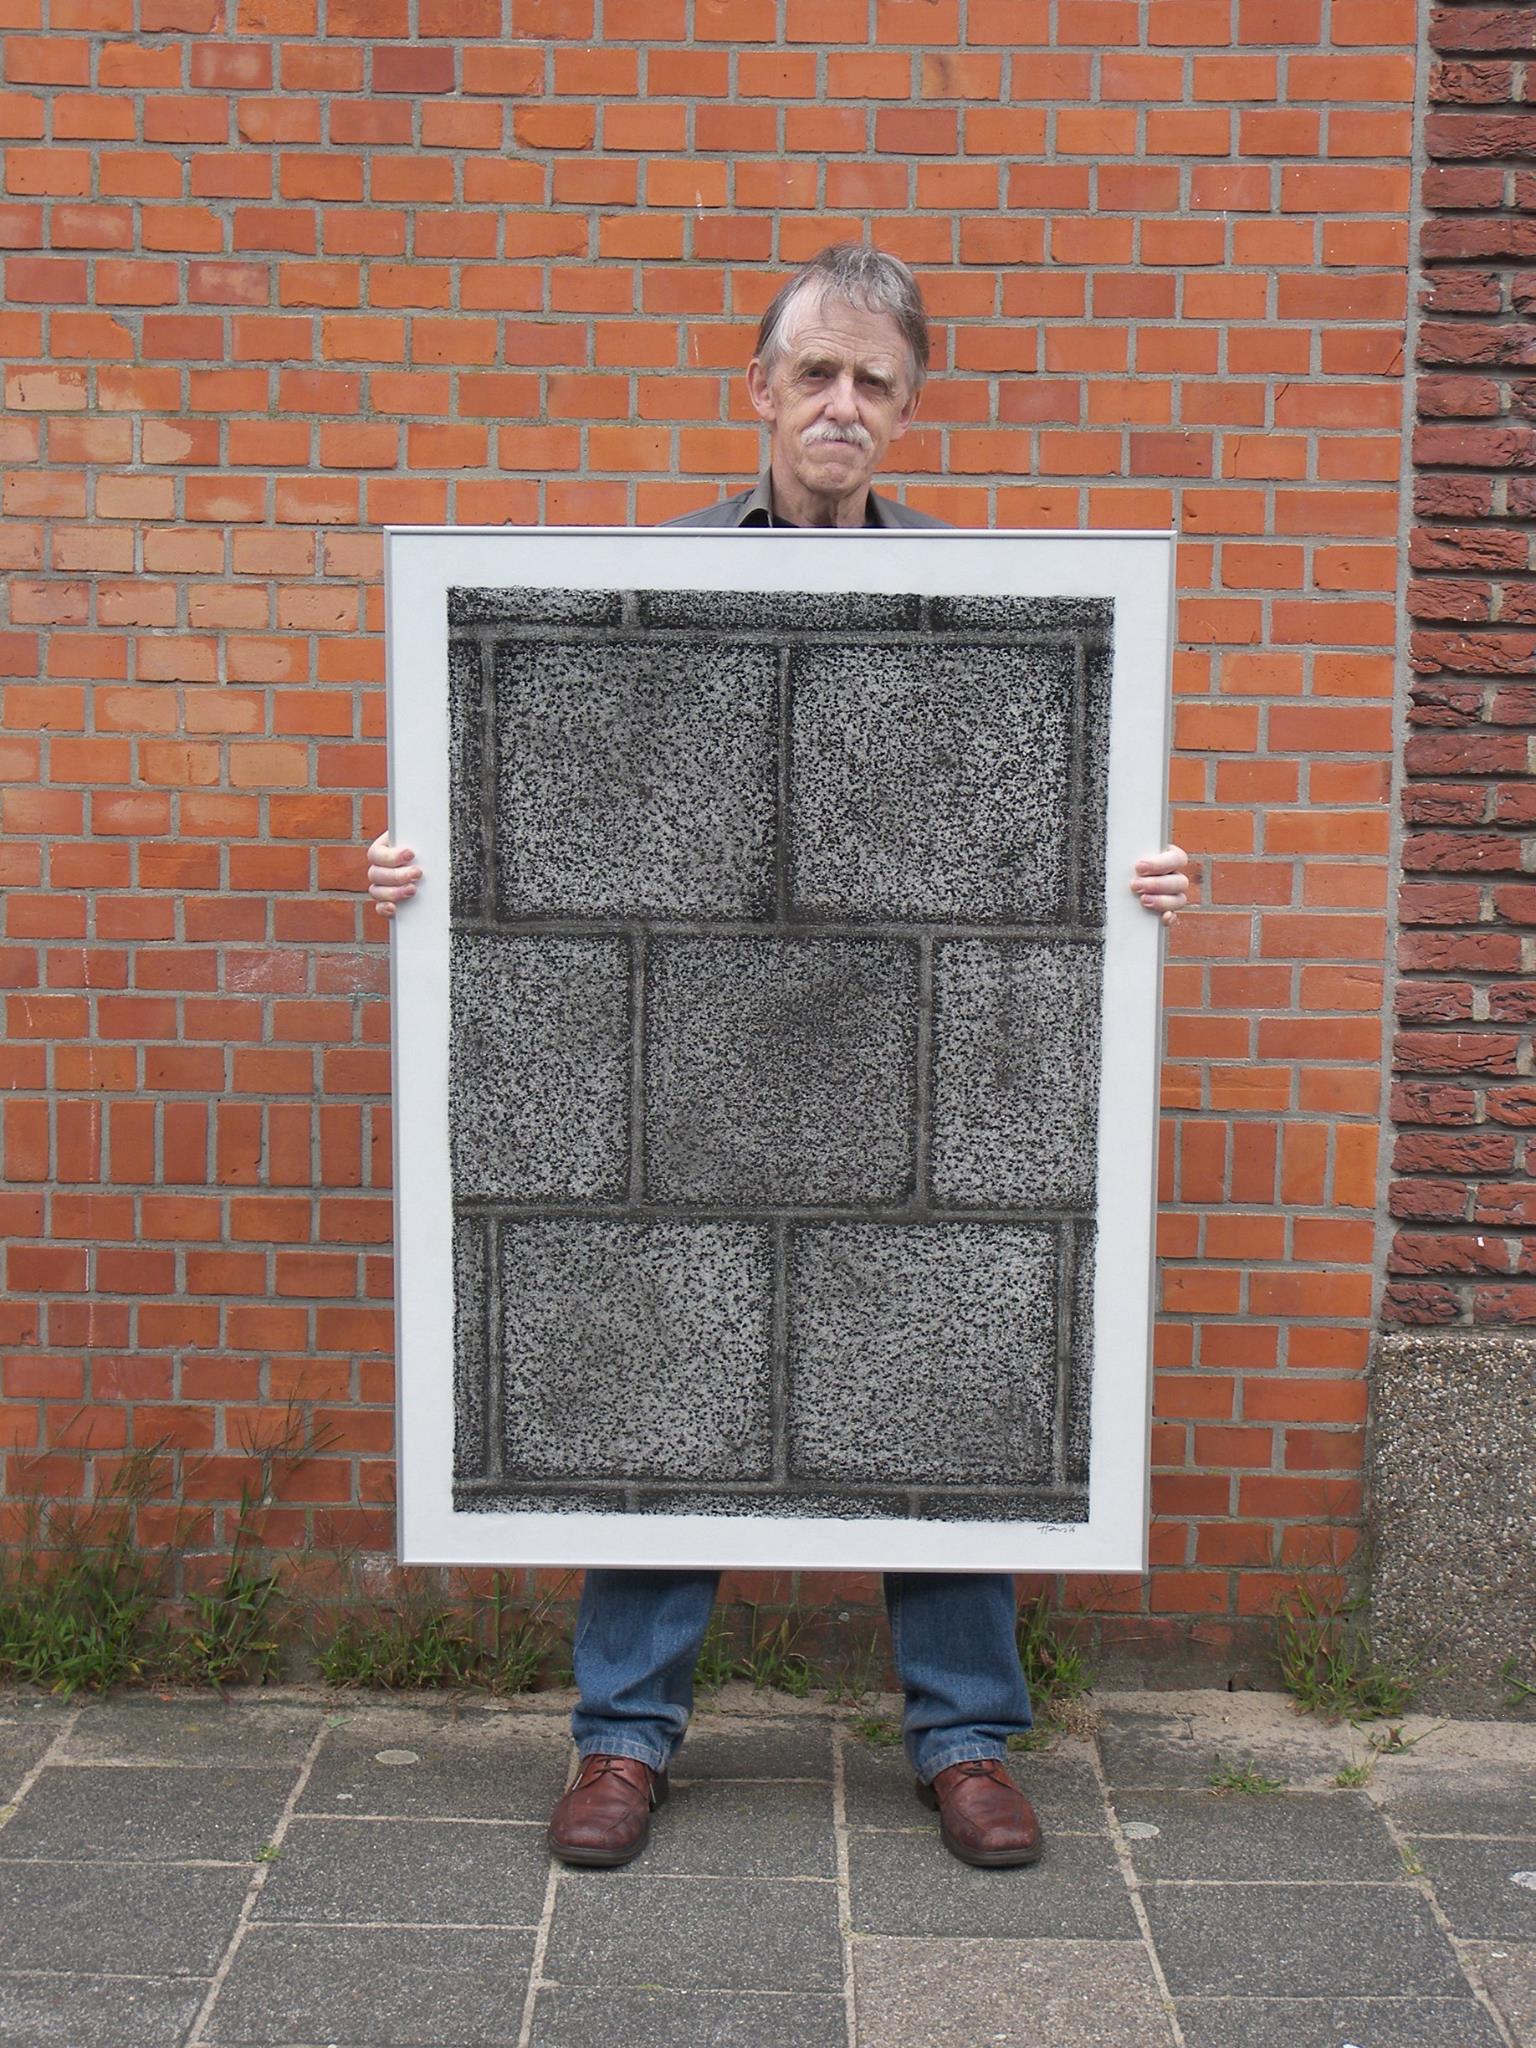 Hans Rietbergen holding up a rubbing of the paving stones where he takes pictures of people passing by his home.